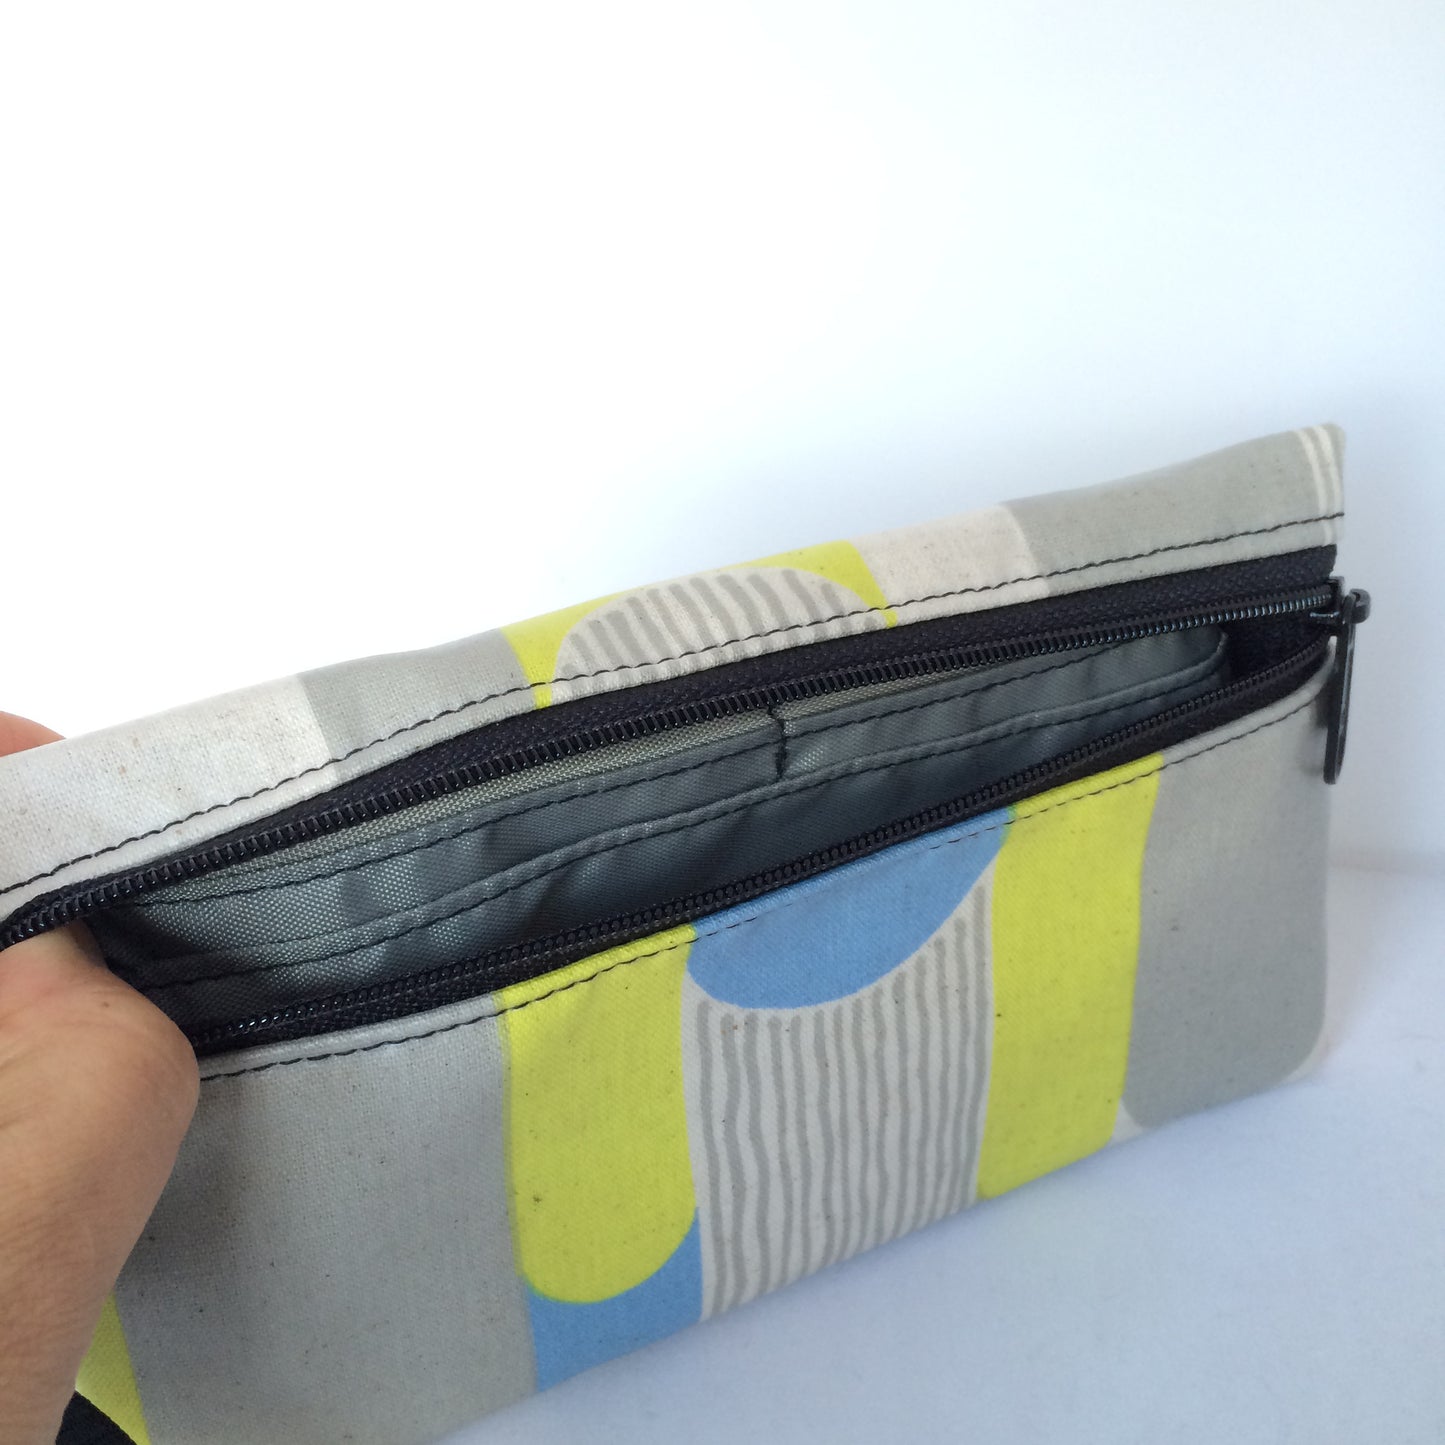 Large Wristlet in Gray Blue and Yellow